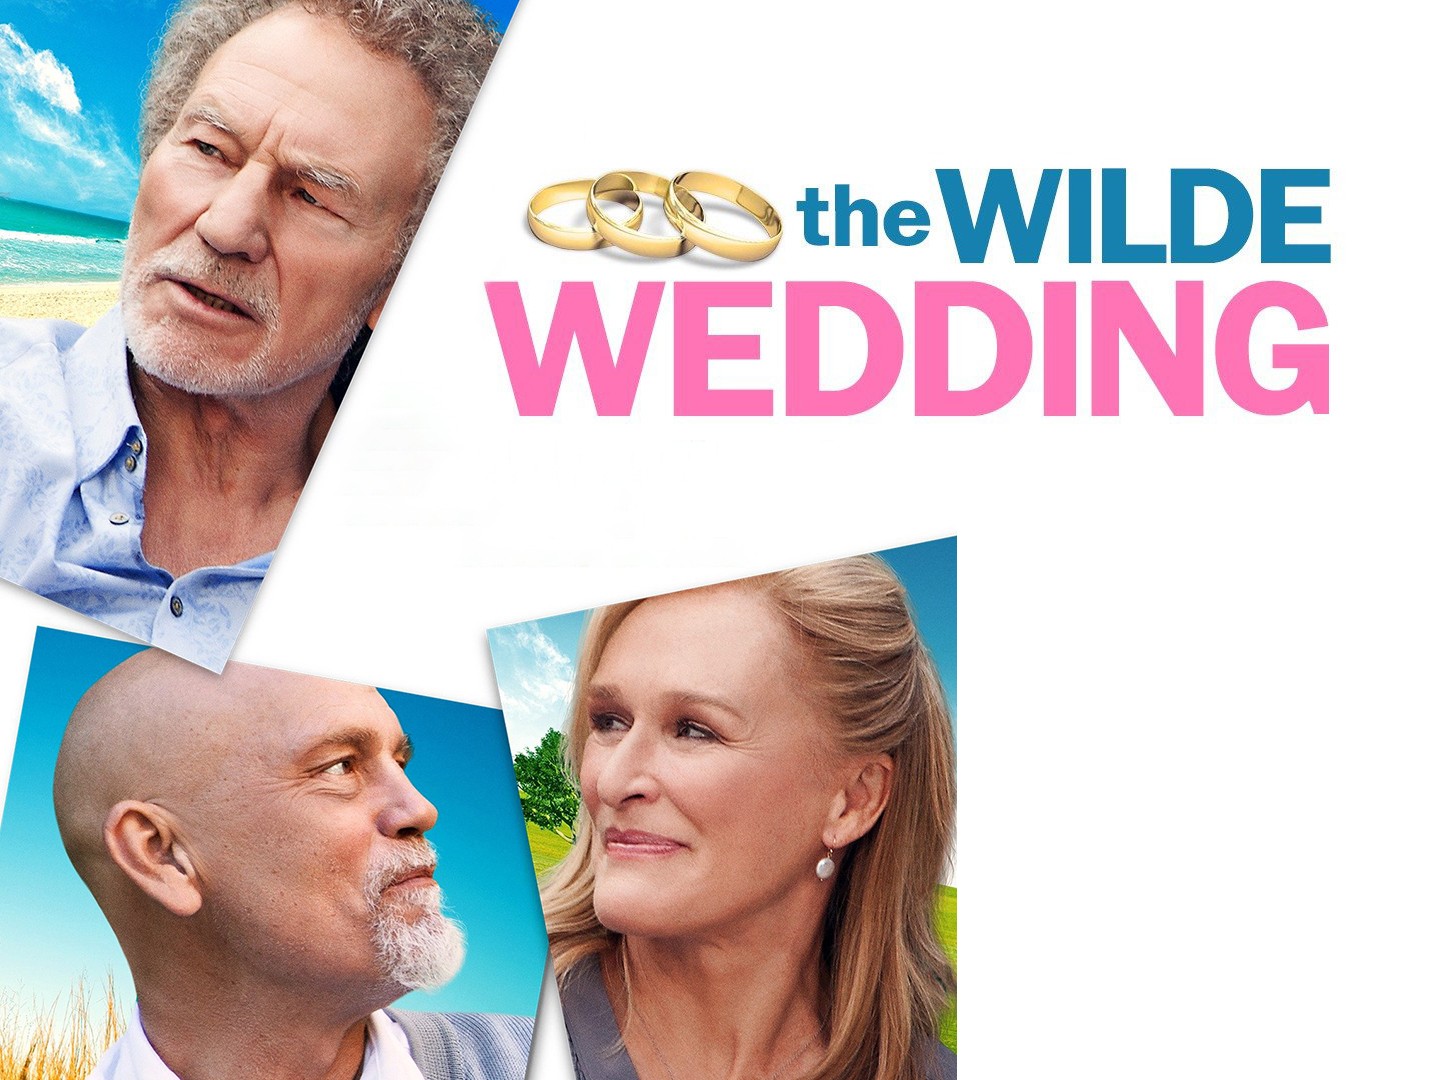 The Trailer For 'The Wilde Wedding' Is Out